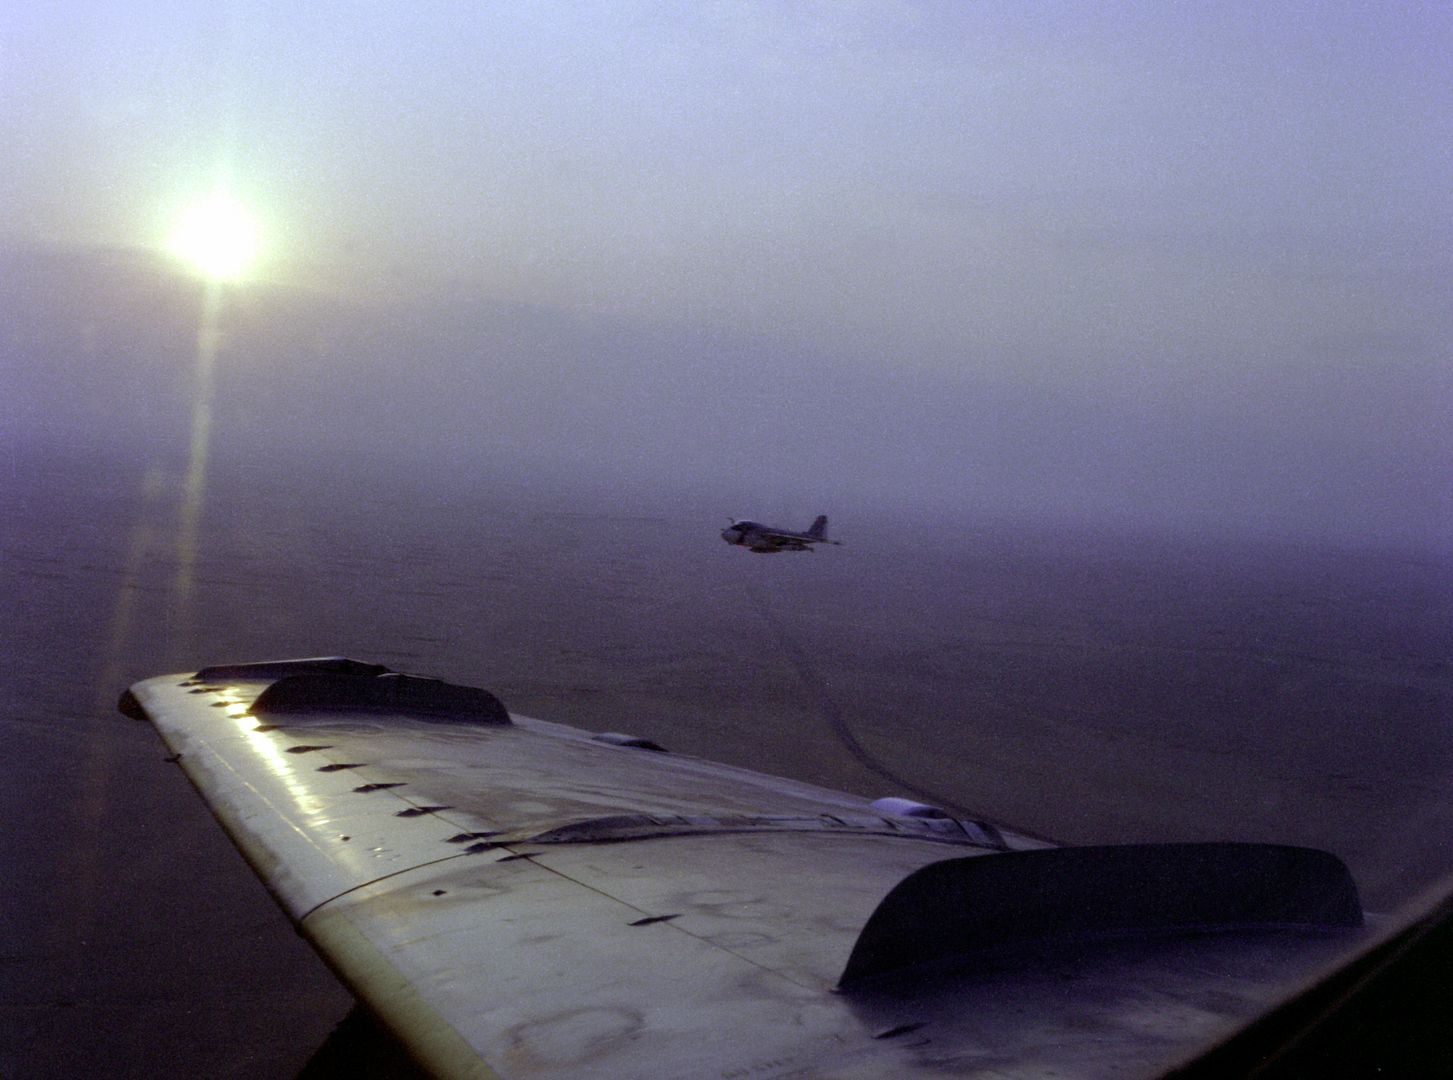 A Left Side View Of An A 6E Intruder Aircraft In Flight Off The Wing Of Another Aircraft In The Morning Sun